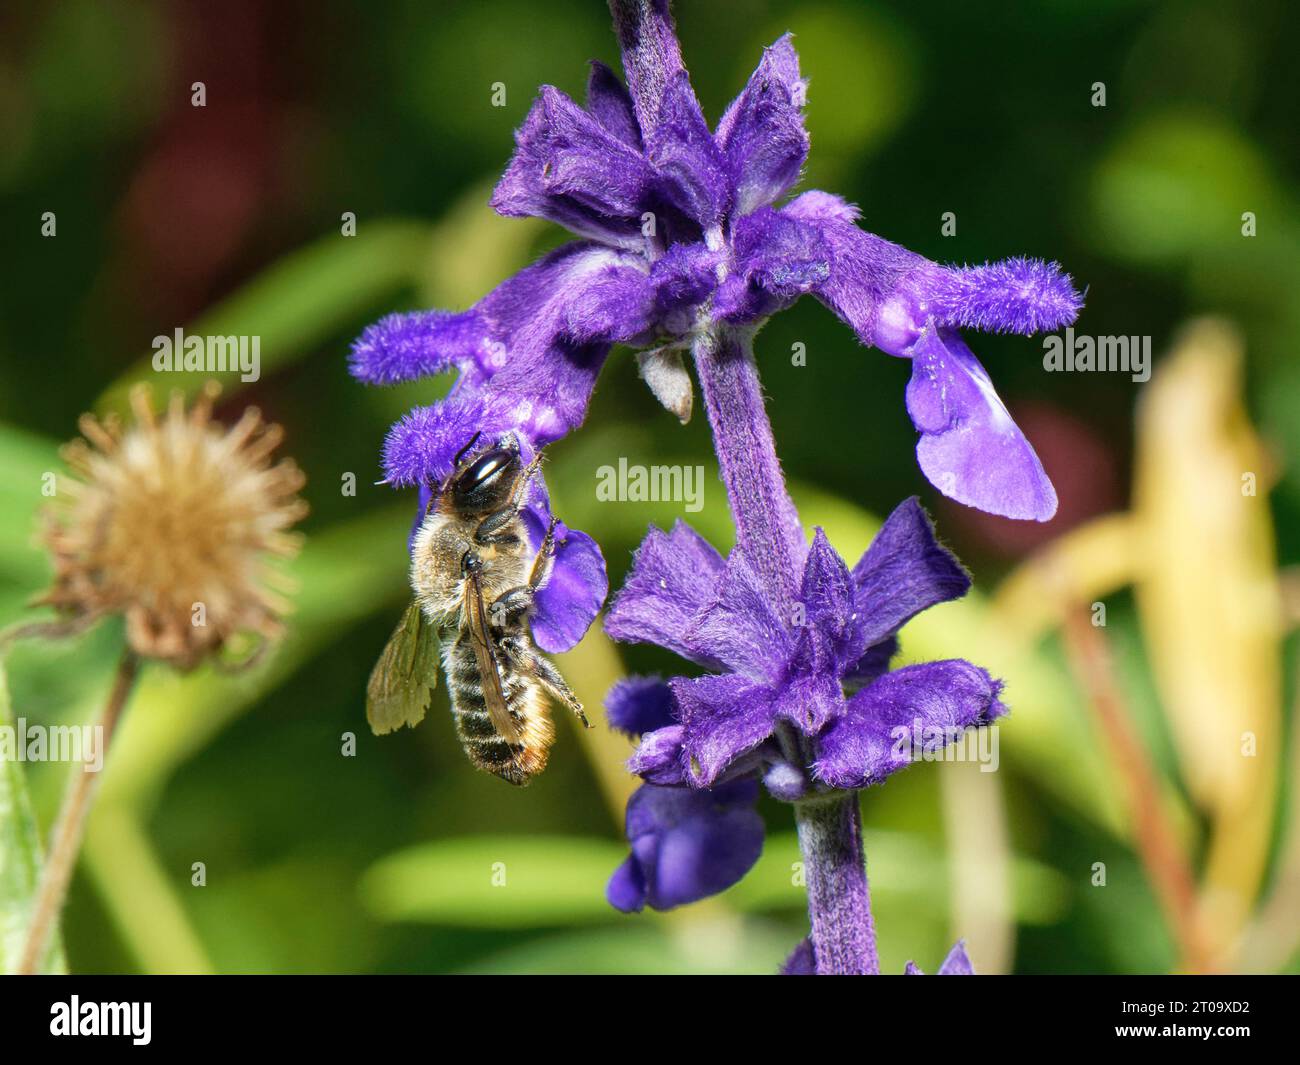 Wood-carving leafcutter bee (Megachile ligniseca) female nectaring from Salvia flowers, Wiltshire garden, UK, July. Stock Photo